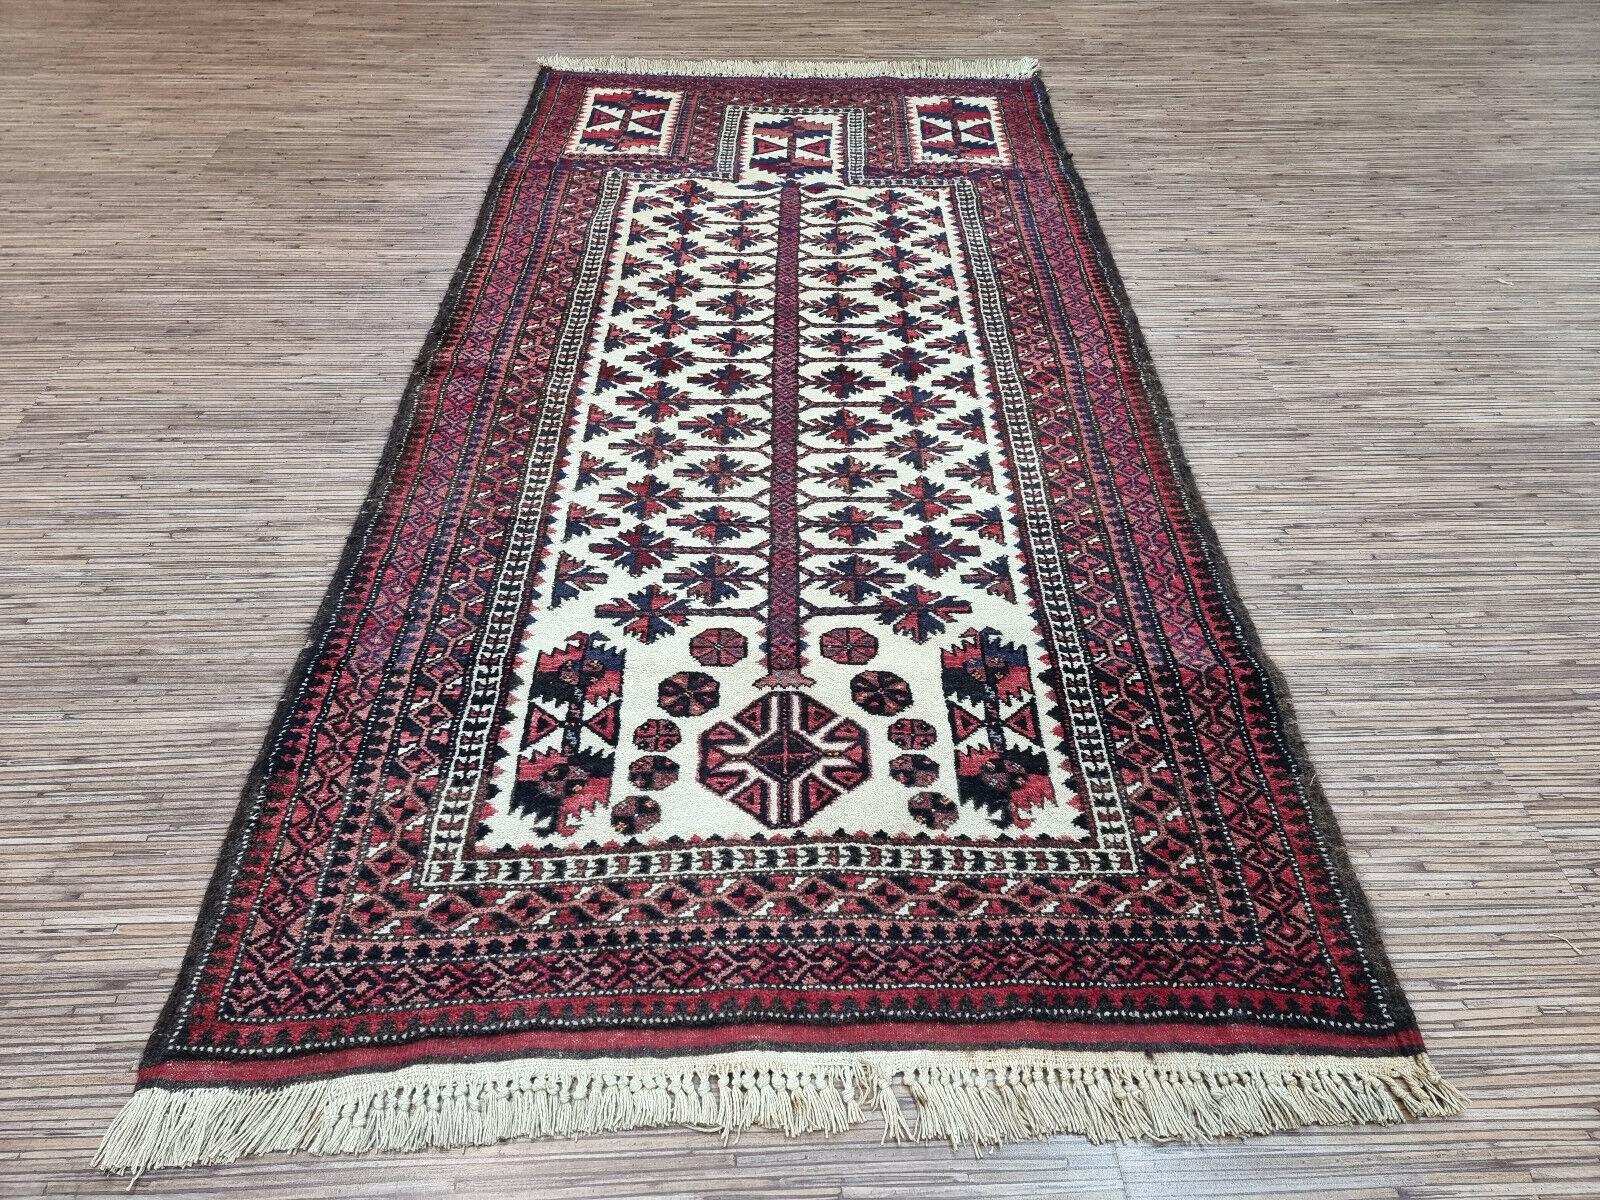 Hand-Knotted Handmade Vintage Afghan Baluch Prayer Rug 2.7' x 5.5', 1950s - 1D90 For Sale